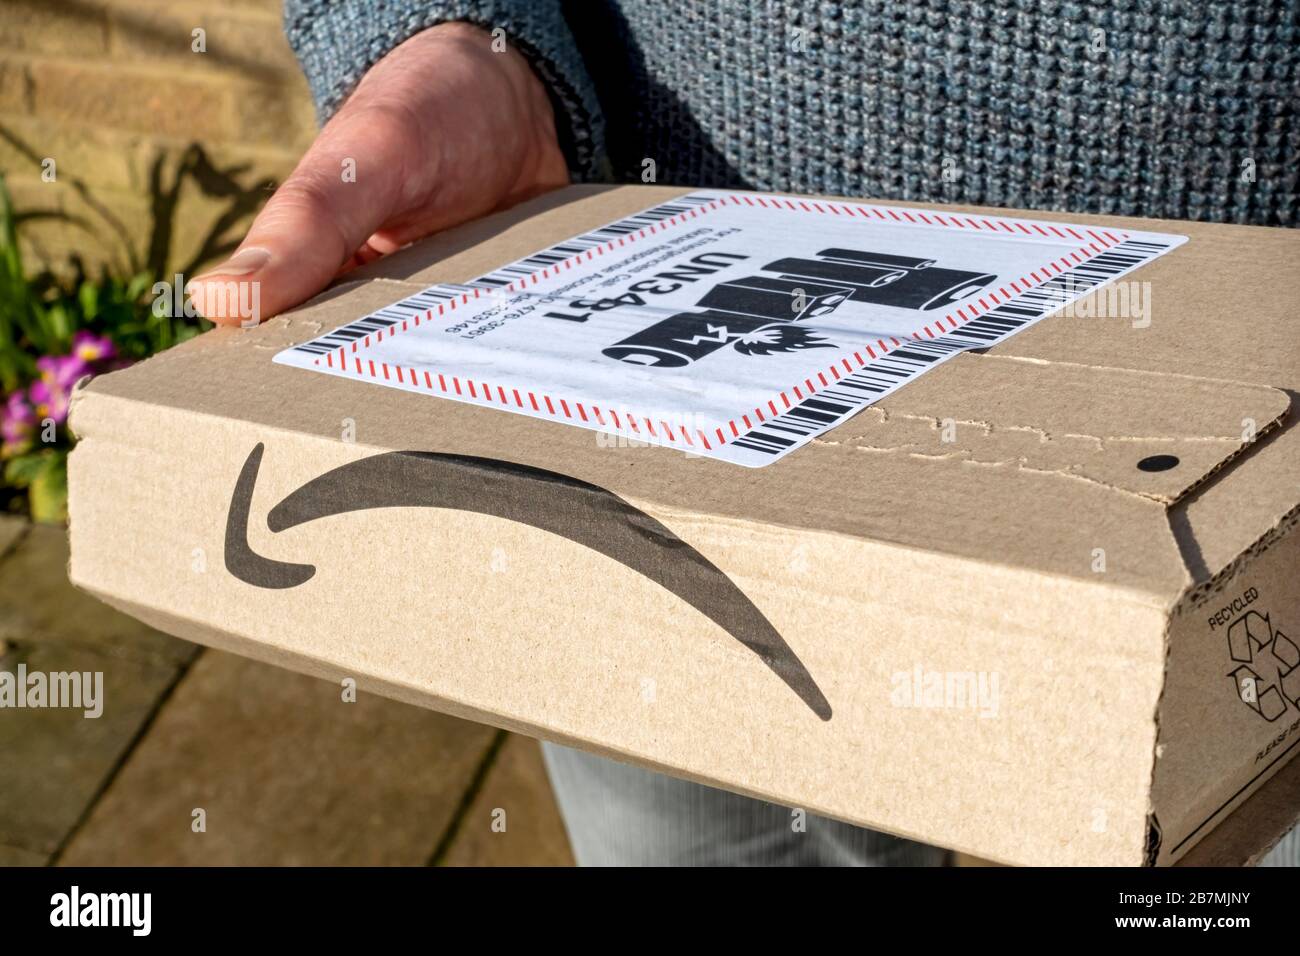 Close up of person man carrying holding online delivery Amazon box package delivery with lithium ion battery warning label England UK United Kingdom Stock Photo